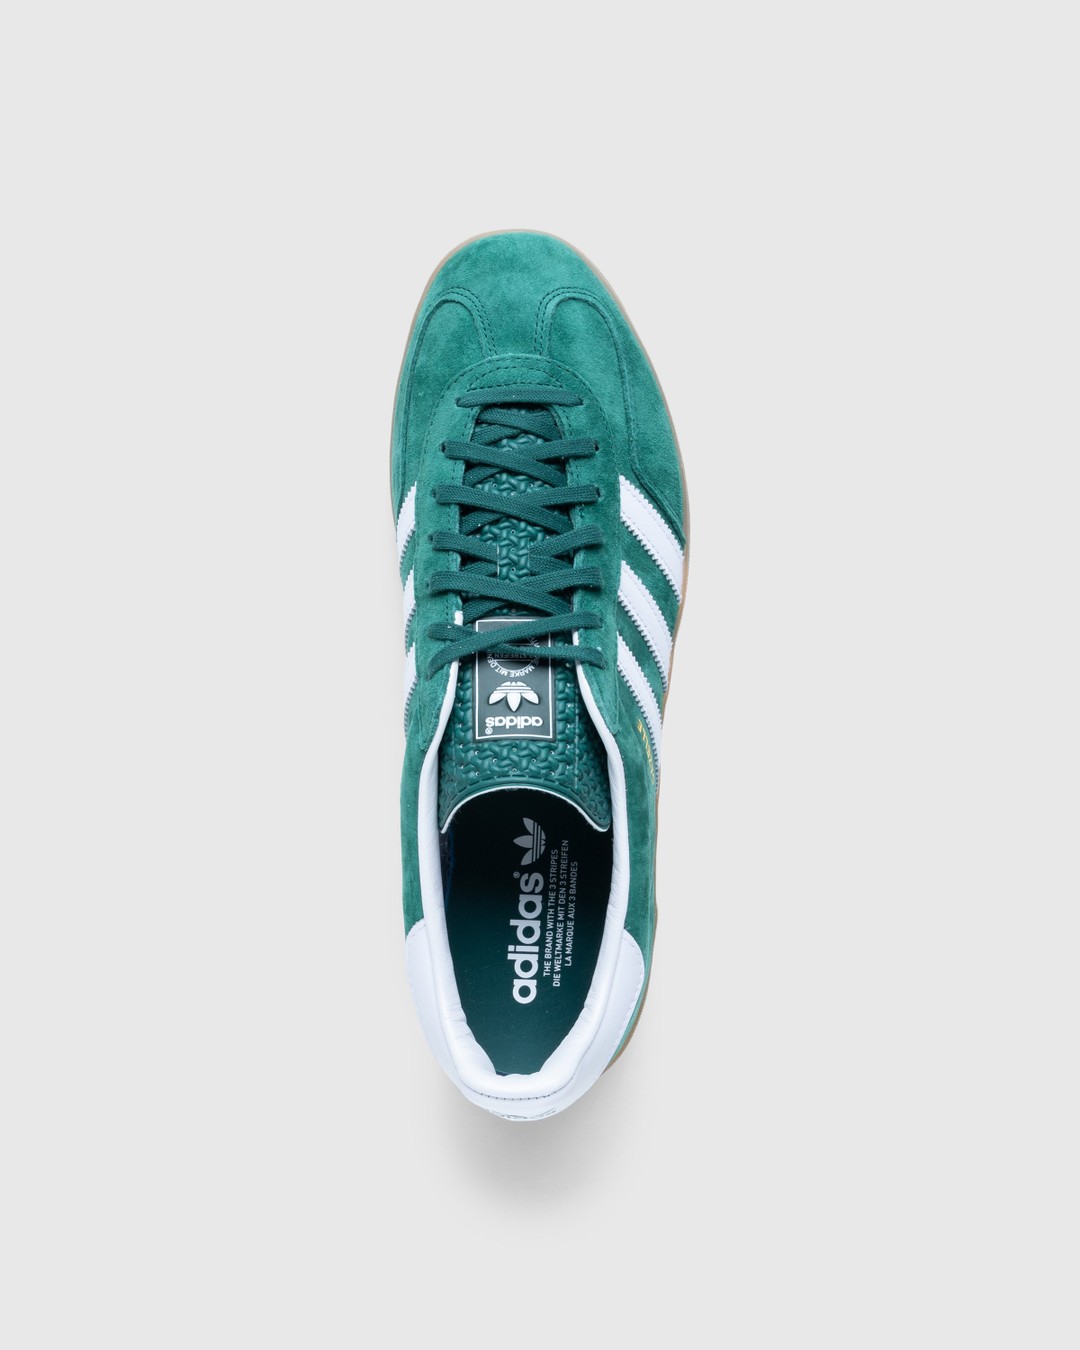 green adidas trainers